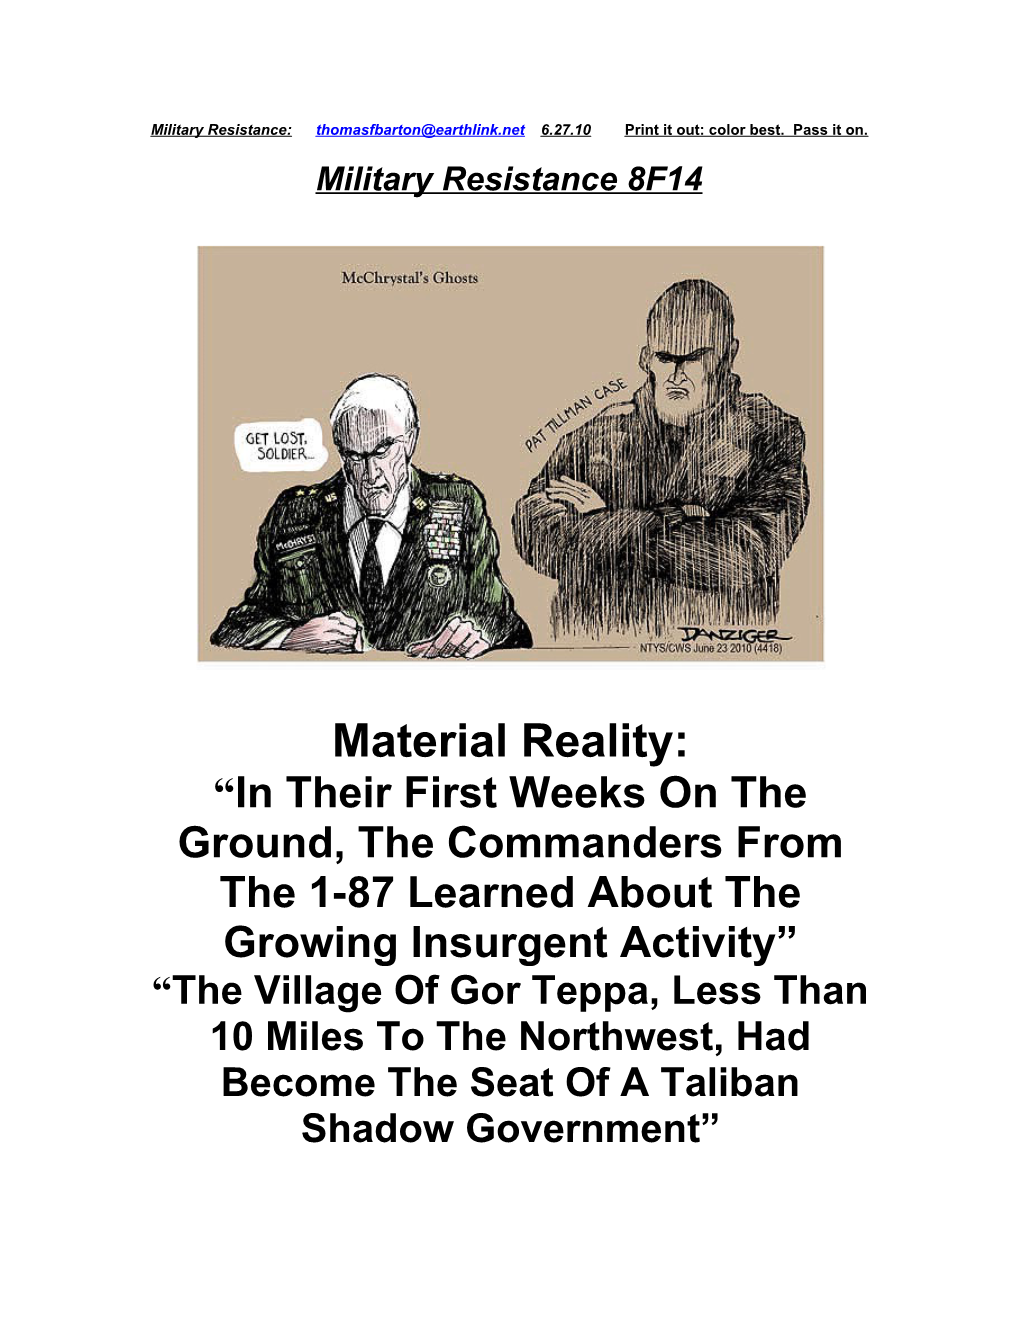 Military Resistance 8F14